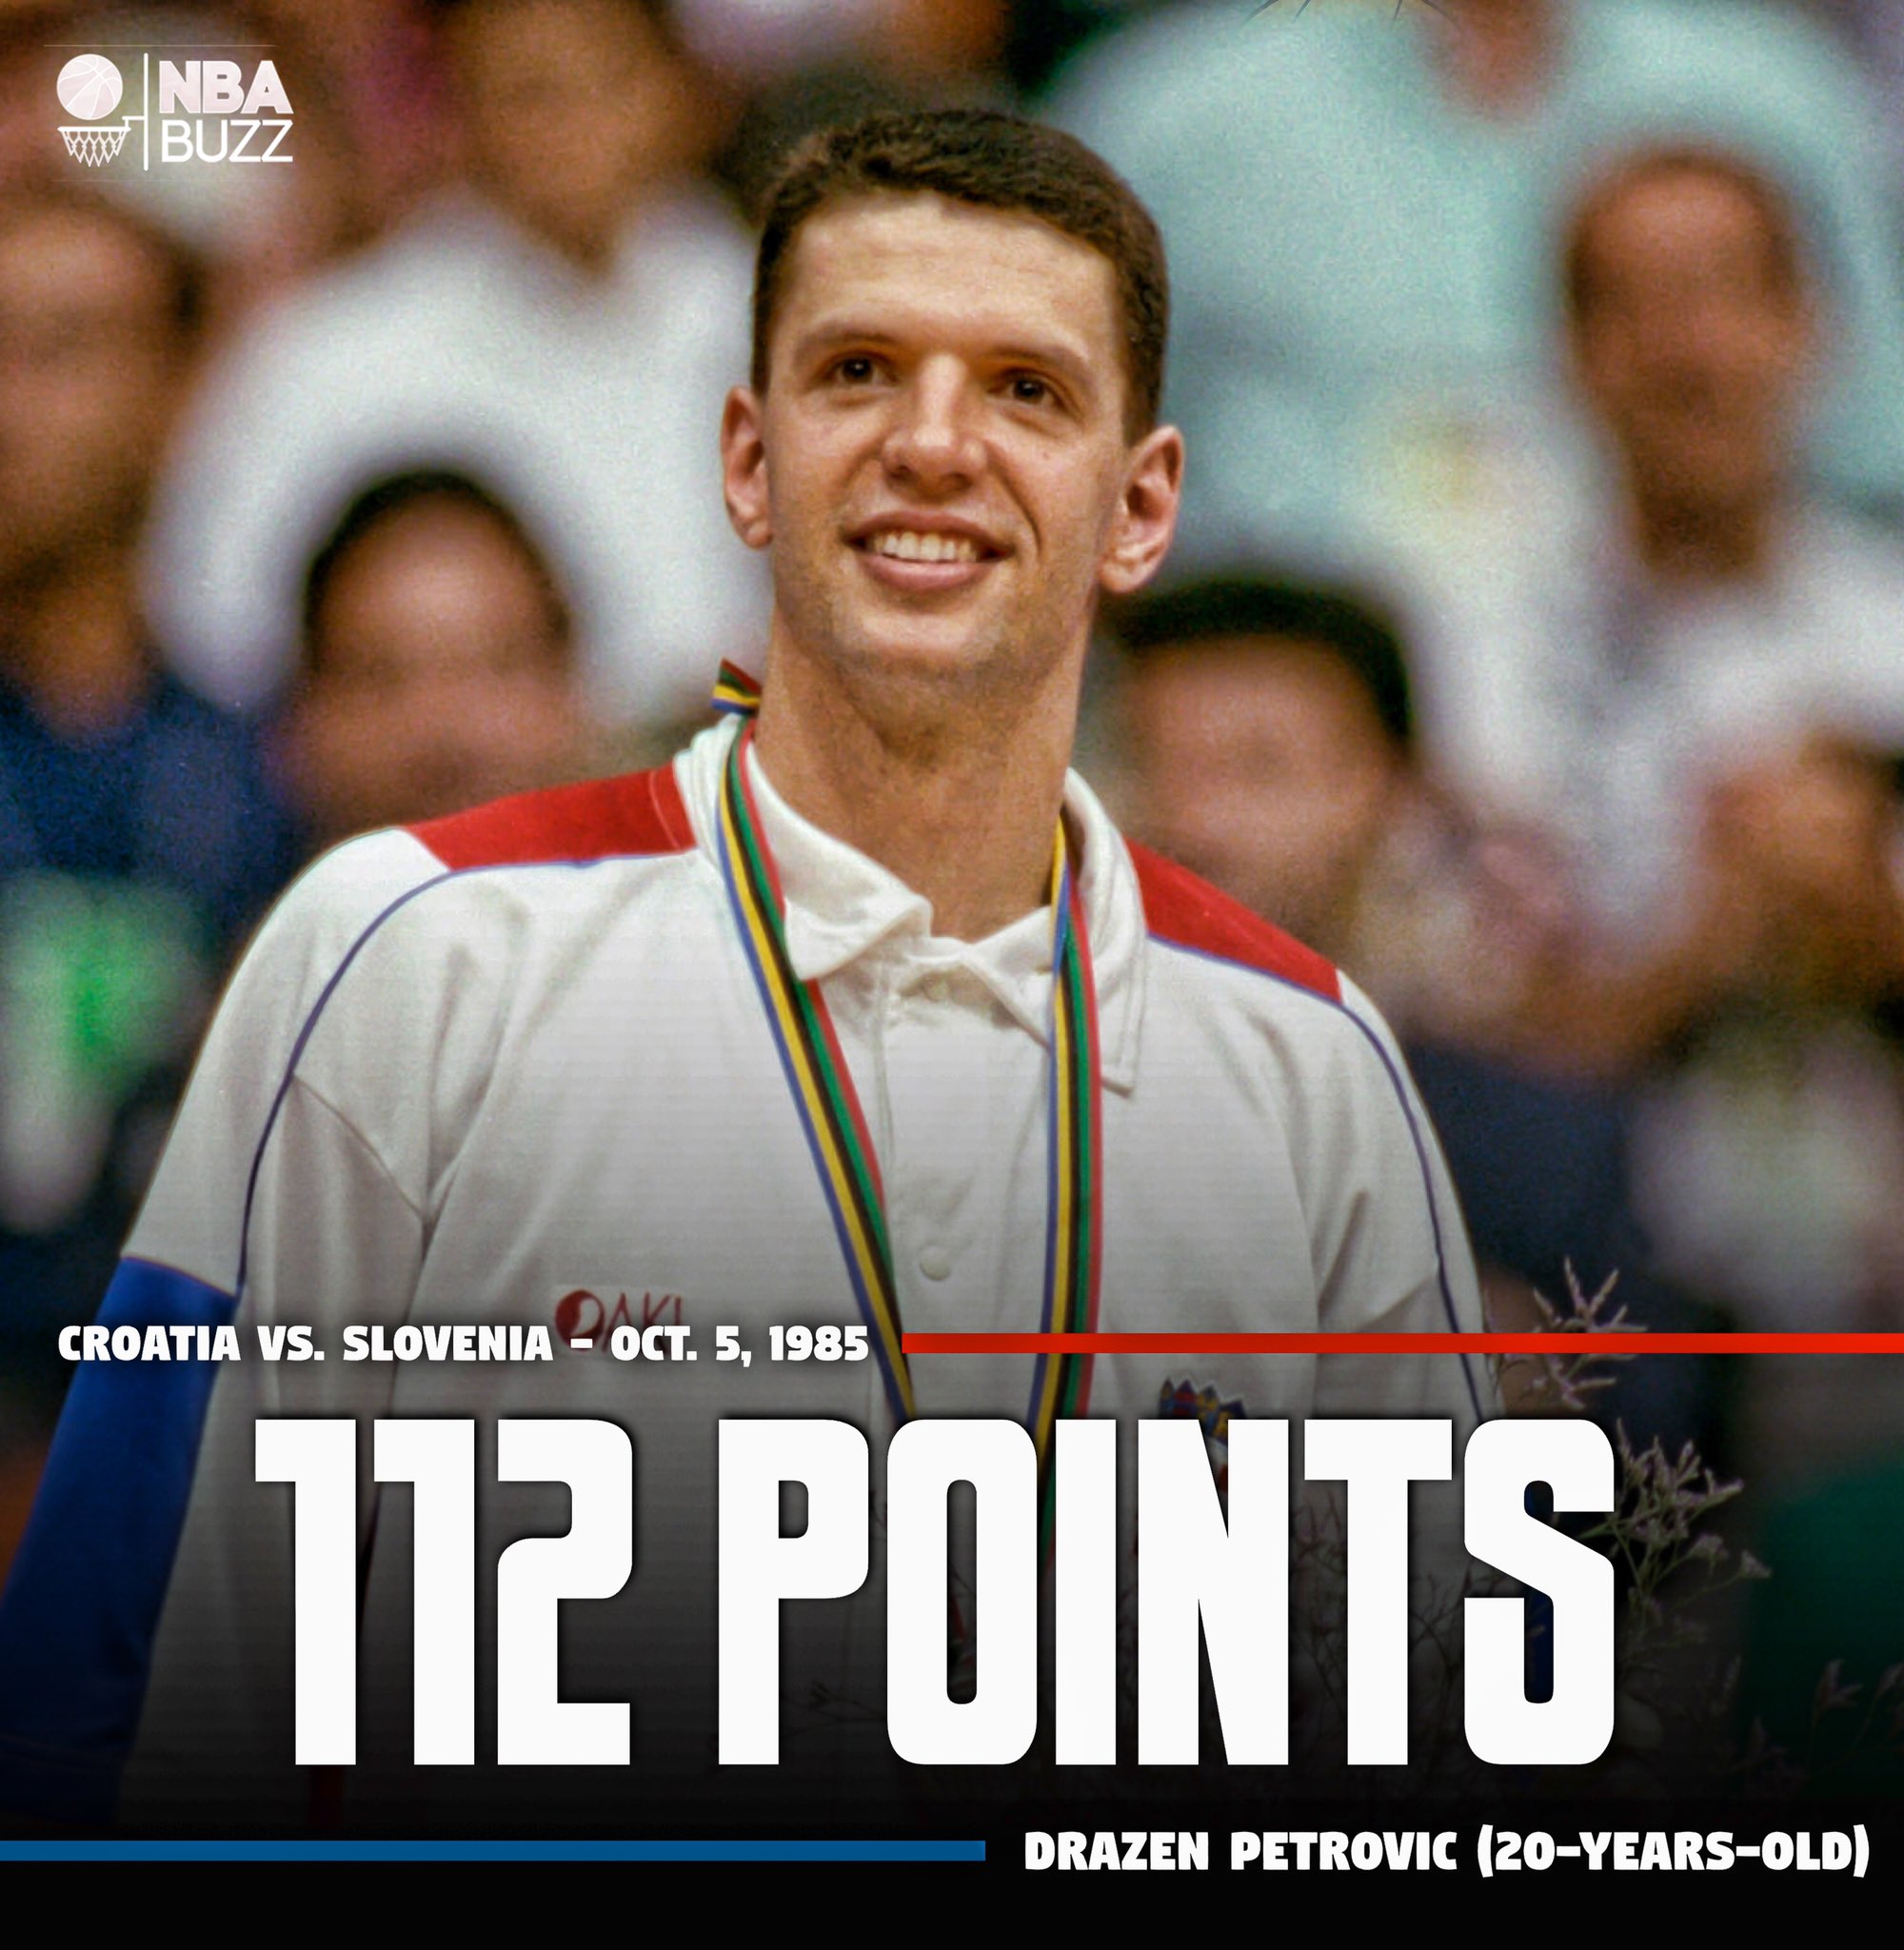 The GREATEST SHOOTER Ever Who Was KILLED In A Car Accident! The TRAGIC Death  Of DRAZEN PETROVIC 